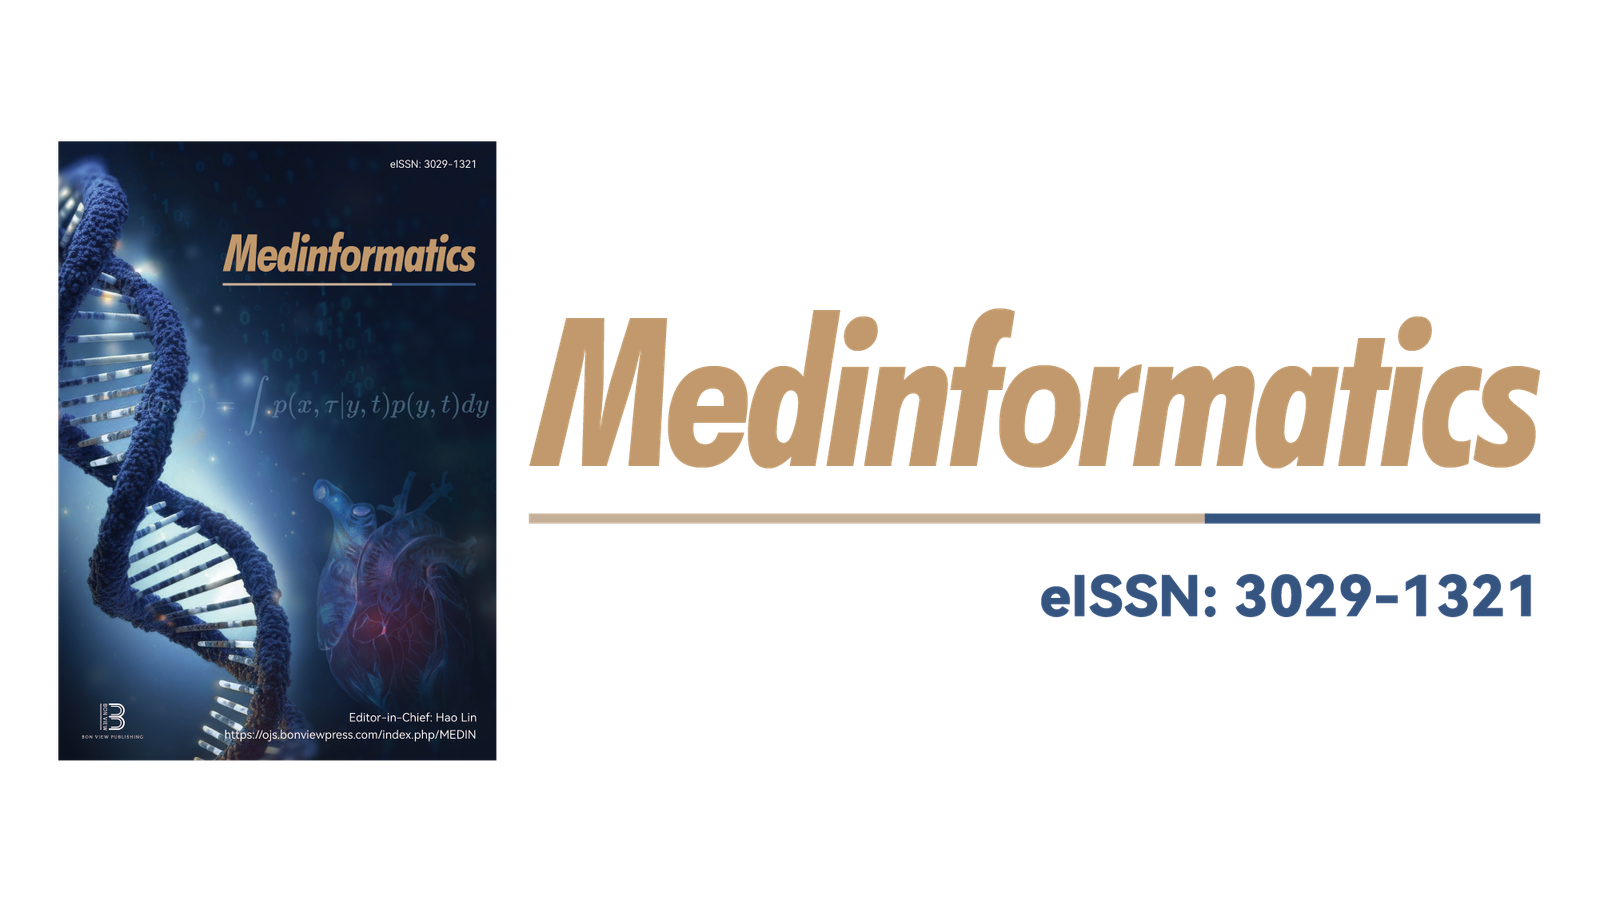 Medinformatics (MEDIN) is an engaging and peer-reviewed journal that serves as a platform for sharing the cutting-edge research in the interdisciplinary field of biomedicine and informatics. By doing so, we aim to establish effective channels of communication and promote interdisciplinary integration between biomedicine, mathematics, and computer science. The journal welcomes submissions fostering collaboration and innovation among medical scientists, clinicians, mathematicians, statisticians, and computer scientists.    